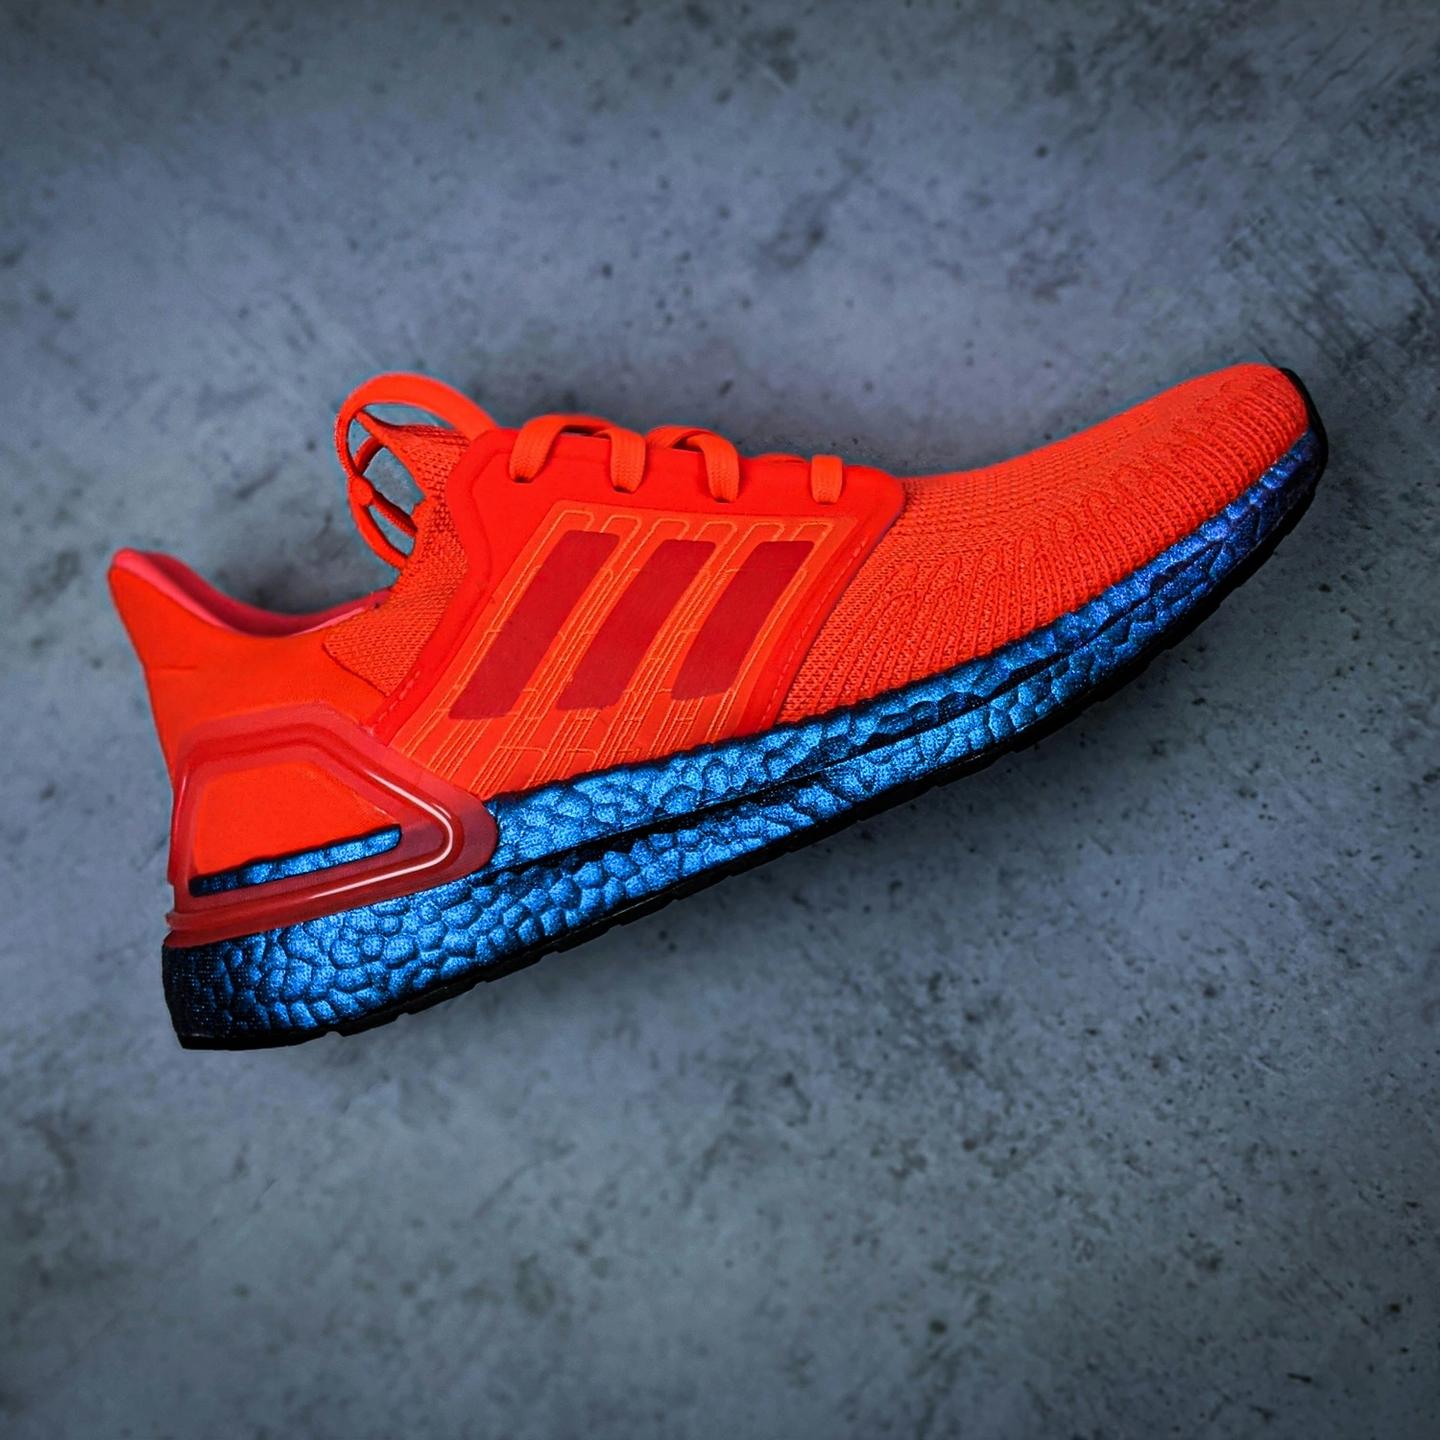 a pair of orange and blue adidas ultra boost shoes are sitting on a concrete surface .​​​​‌﻿‍﻿​‍​‍‌‍﻿﻿‌﻿​‍‌‍‍‌‌‍‌﻿‌‍‍‌‌‍﻿‍​‍​‍​﻿‍‍​‍​‍‌﻿​﻿‌‍​‌‌‍﻿‍‌‍‍‌‌﻿‌​‌﻿‍‌​‍﻿‍‌‍‍‌‌‍﻿﻿​‍​‍​‍﻿​​‍​‍‌‍‍​‌﻿​‍‌‍‌‌‌‍‌‍​‍​‍​﻿‍‍​‍​‍‌‍‍​‌﻿‌​‌﻿‌​‌﻿​​‌﻿​﻿​﻿‍‍​‍﻿﻿​‍﻿﻿‌﻿‌‍‌‍‍‌‌﻿​﻿‌﻿‌‌‌‍​‌‌‍﻿​​‍﻿‌‌‍‌‌‌‍‌​‌‍‍‌‌﻿‌​‌‍‍‌‌‍﻿‍‌‍‌﻿​‍﻿‌‌﻿​﻿‌﻿‌​‌﻿‌‌‌‍‌​‌‍‍‌‌‍﻿﻿​‍﻿‍‌﻿​﻿‌‍​‌‌‍﻿‍‌‍‍‌‌﻿‌​‌﻿‍‌​‍﻿‍‌‍​‍‌﻿‌‌‌‍‍‌‌‍﻿​‌‍‌​​‍﻿﻿‌﻿​‍‌‍‌‌‌‍﻿‌‌‍‍‌‌﻿‍​​‍﻿﻿‌‍‍‌‌‍﻿‍‌﻿‌​‌‍‌‌‌‍﻿‍‌﻿‌​​‍﻿﻿‌‍‌‌‌‍‌​‌‍‍‌‌﻿‌​​‍﻿﻿‌‍﻿‌‌‍﻿﻿‌‍‌​‌‍‌‌​﻿﻿‌‌﻿​​‌﻿​‍‌‍‌‌‌﻿​﻿‌‍‌‌‌‍﻿‍‌﻿‌​‌‍​‌‌﻿‌​‌‍‍‌‌‍﻿﻿‌‍﻿‍​﻿‍﻿‌‍‍‌‌‍‌​​﻿﻿‌​﻿‌﻿​﻿‌‍‌‍‌‍​﻿​‌‌‍​‌‌‍​﻿‌‍‌‌​﻿​​​‍﻿‌‌‍​‍​﻿​​​﻿‌​‌‍​‌​‍﻿‌​﻿‌​‌‍​﻿‌‍‌‍‌‍‌‍​‍﻿‌​﻿‍‌​﻿​​​﻿‌‍​﻿​﻿​‍﻿‌​﻿‌‍​﻿‍​​﻿​‌​﻿​‍​﻿​‌​﻿‌​​﻿‌‌​﻿‍​​﻿​‌​﻿​‍​﻿‌﻿​﻿‍‌​﻿‍﻿‌﻿‌​‌﻿‍‌‌﻿​​‌‍‌‌​﻿﻿‌‌﻿​﻿‌‍‍​‌‍﻿﻿‌‍‌‌​﻿‍﻿‌﻿​​‌‍​‌‌﻿‌​‌‍‍​​﻿﻿‌‌‍﻿‌‌‍‌‌‌‍‌​‌‍‍‌‌‍​‌​‍‌‌​﻿‌‌‌​​‍‌‌﻿﻿‌‍‍﻿‌‍‌‌‌﻿‍‌​‍‌‌​﻿​﻿‌​‌​​‍‌‌​﻿​﻿‌​‌​​‍‌‌​﻿​‍​﻿​‍​﻿‌​‌‍‌​​﻿​‌​﻿‌﻿​﻿​​​﻿​﻿‌‍​﻿​﻿​‍‌‍​‍​﻿​‍‌‍‌‍​﻿​‌​‍‌‌​﻿​‍​﻿​‍​‍‌‌​﻿‌‌‌​‌​​‍﻿‍‌‍​‌‌‍﻿​‌﻿‌​​﻿‍﻿‌﻿‌​‌‍﻿﻿‌‍﻿﻿‌‍﻿​​﻿﻿‌‌﻿​​‌﻿​‍‌‍‌‌‌﻿​﻿‌‍‌‌‌‍﻿‍‌﻿‌​‌‍​‌‌﻿‌​‌‍‍‌‌‍﻿﻿‌‍﻿‍​﻿﻿﻿‌‍​‍‌‍​‌‌﻿​﻿‌‍‌‌‌‌‌‌‌﻿​‍‌‍﻿​​﻿﻿‌‌‍‍​‌﻿‌​‌﻿‌​‌﻿​​‌﻿​﻿​‍‌‌​﻿​﻿‌​​‌​‍‌‌​﻿​‍‌​‌‍​‍‌‌​﻿​‍‌​‌‍‌﻿‌‍‌‍‍‌‌﻿​﻿‌﻿‌‌‌‍​‌‌‍﻿​​‍﻿‌‌‍‌‌‌‍‌​‌‍‍‌‌﻿‌​‌‍‍‌‌‍﻿‍‌‍‌﻿​‍﻿‌‌﻿​﻿‌﻿‌​‌﻿‌‌‌‍‌​‌‍‍‌‌‍﻿﻿​‍﻿‍‌﻿​﻿‌‍​‌‌‍﻿‍‌‍‍‌‌﻿‌​‌﻿‍‌​‍﻿‍‌‍​‍‌﻿‌‌‌‍‍‌‌‍﻿​‌‍‌​​‍‌‍‌‍‍‌‌‍‌​​﻿﻿‌​﻿‌﻿​﻿‌‍‌‍‌‍​﻿​‌‌‍​‌‌‍​﻿‌‍‌‌​﻿​​​‍﻿‌‌‍​‍​﻿​​​﻿‌​‌‍​‌​‍﻿‌​﻿‌​‌‍​﻿‌‍‌‍‌‍‌‍​‍﻿‌​﻿‍‌​﻿​​​﻿‌‍​﻿​﻿​‍﻿‌​﻿‌‍​﻿‍​​﻿​‌​﻿​‍​﻿​‌​﻿‌​​﻿‌‌​﻿‍​​﻿​‌​﻿​‍​﻿‌﻿​﻿‍‌​‍‌‍‌﻿‌​‌﻿‍‌‌﻿​​‌‍‌‌​﻿﻿‌‌﻿​﻿‌‍‍​‌‍﻿﻿‌‍‌‌​‍‌‍‌﻿​​‌‍​‌‌﻿‌​‌‍‍​​﻿﻿‌‌‍﻿‌‌‍‌‌‌‍‌​‌‍‍‌‌‍​‌​‍‌‌​﻿‌‌‌​​‍‌‌﻿﻿‌‍‍﻿‌‍‌‌‌﻿‍‌​‍‌‌​﻿​﻿‌​‌​​‍‌‌​﻿​﻿‌​‌​​‍‌‌​﻿​‍​﻿​‍​﻿‌​‌‍‌​​﻿​‌​﻿‌﻿​﻿​​​﻿​﻿‌‍​﻿​﻿​‍‌‍​‍​﻿​‍‌‍‌‍​﻿​‌​‍‌‌​﻿​‍​﻿​‍​‍‌‌​﻿‌‌‌​‌​​‍﻿‍‌‍​‌‌‍﻿​‌﻿‌​​‍‌‍‌﻿‌﻿‌‍﻿﻿‌﻿​‍‌‍‍﻿‌﻿​﻿‌﻿​​‌‍​‌‌‍​﻿‌‍‌‌​﻿﻿‌‌﻿​‍‌‍‌‌‌‍﻿‌‌‍‍‌‌﻿‍​​‍‌‍‌﻿‌​‌‍﻿﻿‌‍﻿﻿‌‍﻿​​﻿﻿‌‌﻿​​‌﻿​‍‌‍‌‌‌﻿​﻿‌‍‌‌‌‍﻿‍‌﻿‌​‌‍​‌‌﻿‌​‌‍‍‌‌‍﻿﻿‌‍﻿‍​‍​‍‌﻿﻿‌